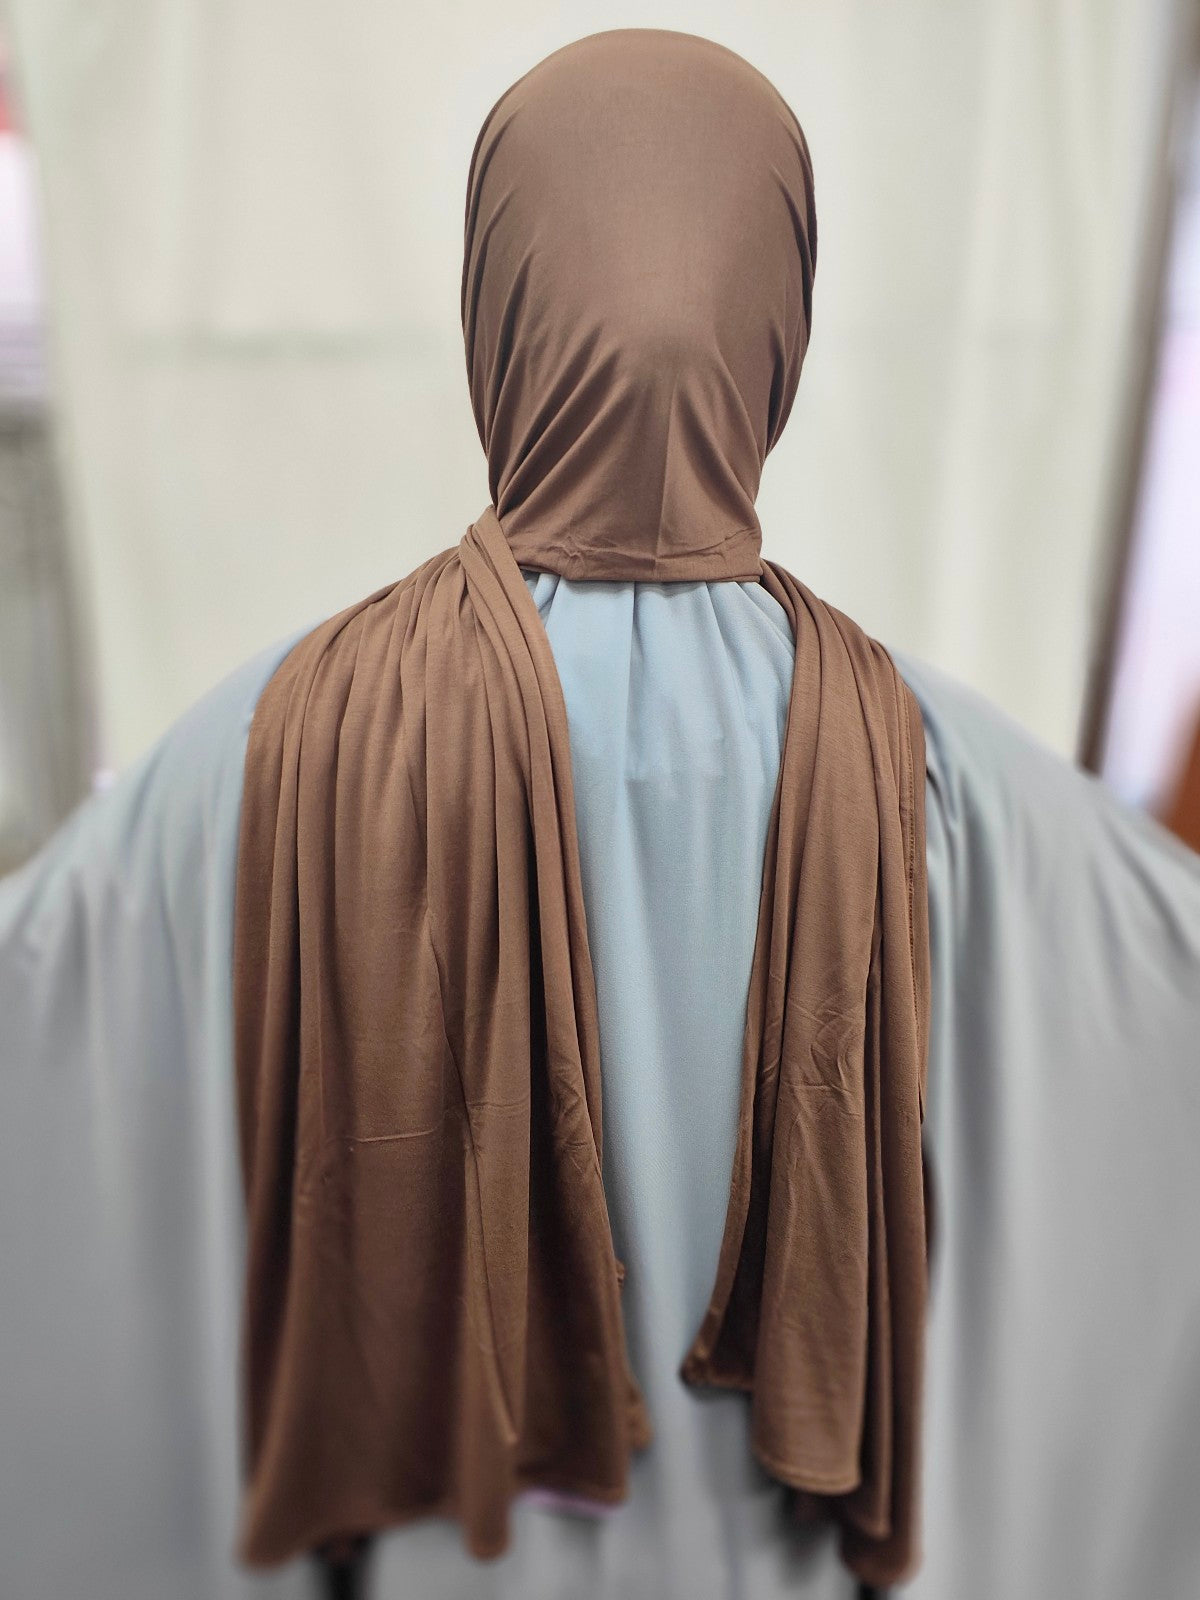 Discover the epitome of elegance and comfort with our Chocolate Brown Pure Bamboo Hijab, exclusively available at Hikmah Boutique. This hijab seamlessly combines style, breathability, and eco-friendliness. Stay cool, confident, and eco-conscious with its natural antibacterial and anti-odor properties. 